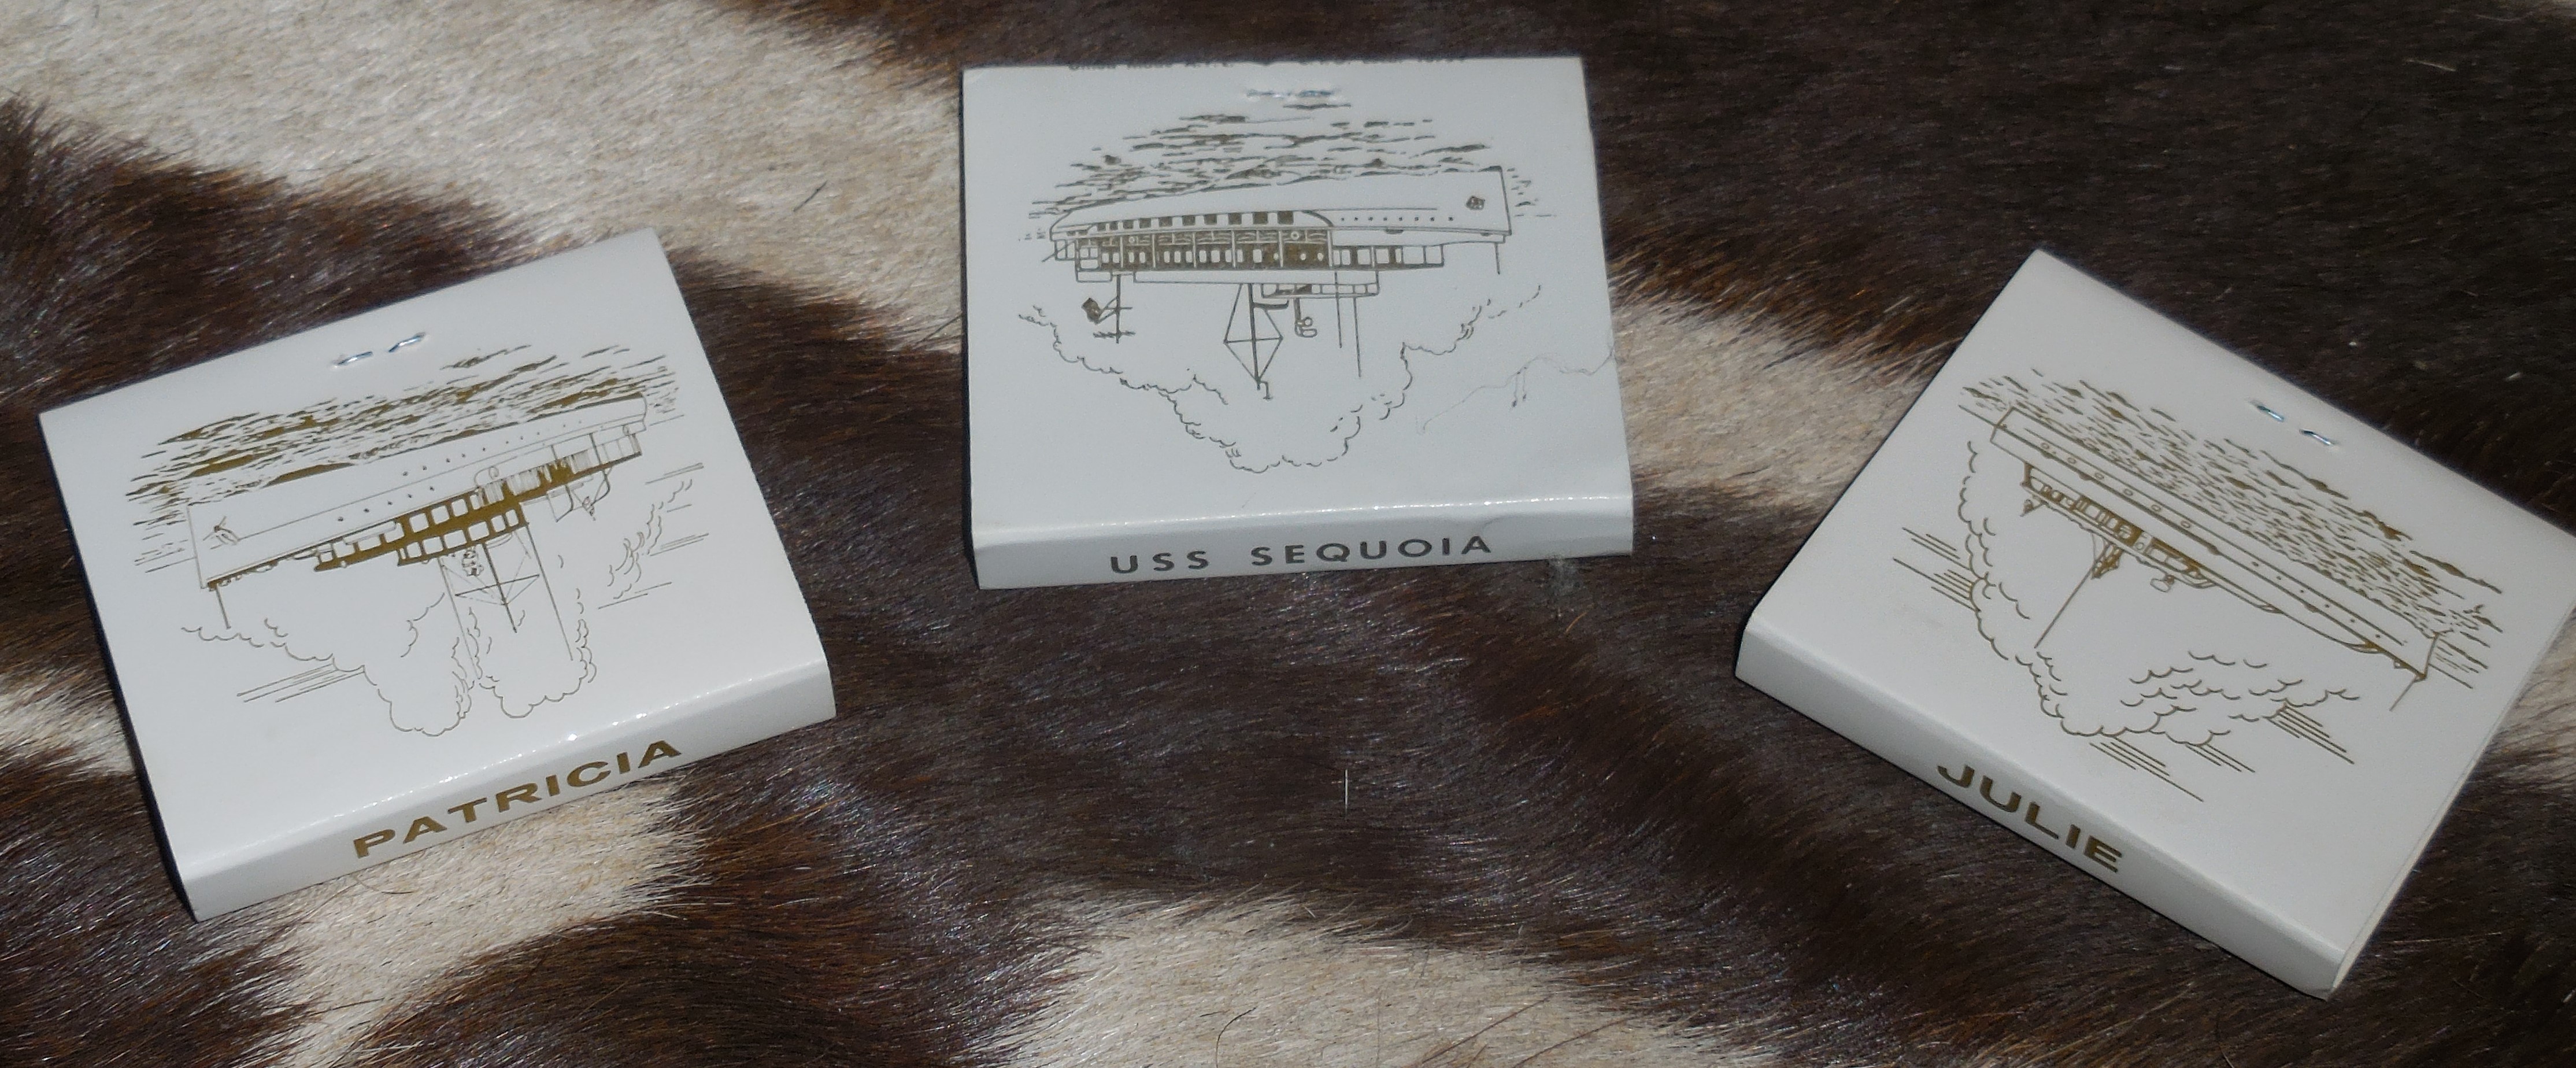 The Patrica and The Julie Very Rare Presidential Yacht Matchbooks